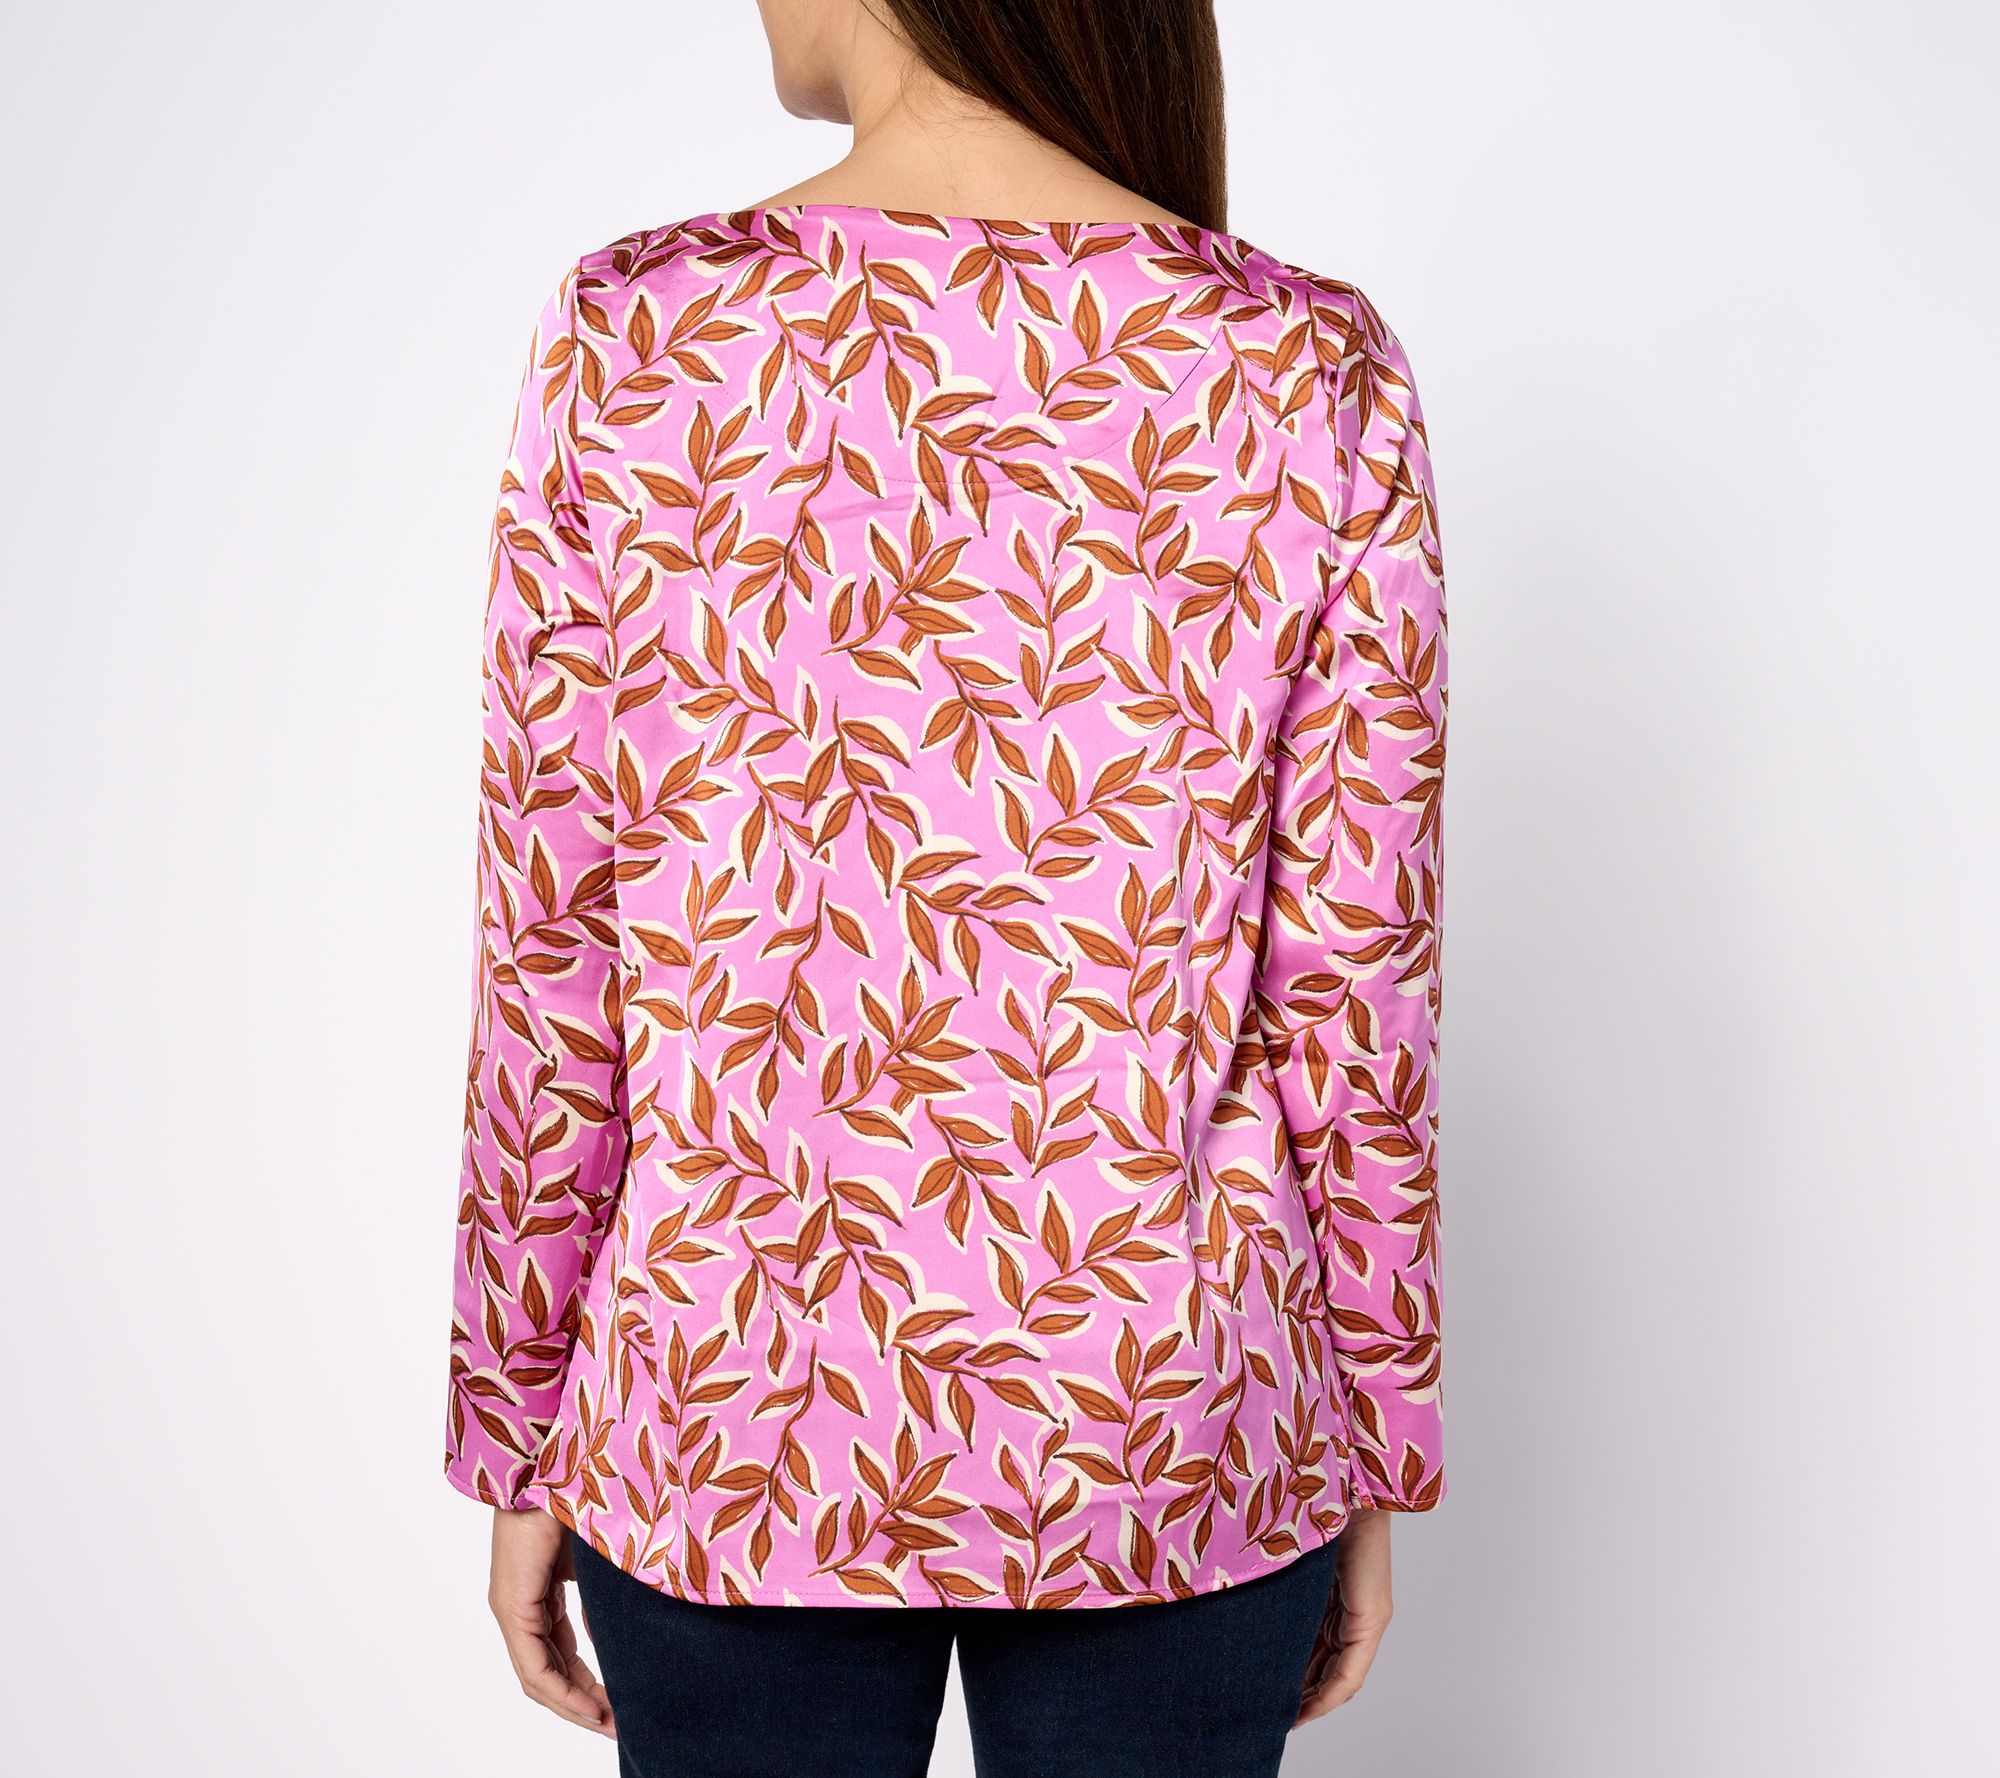 Denim & Co. Printed Woven Blouse with Side Slits